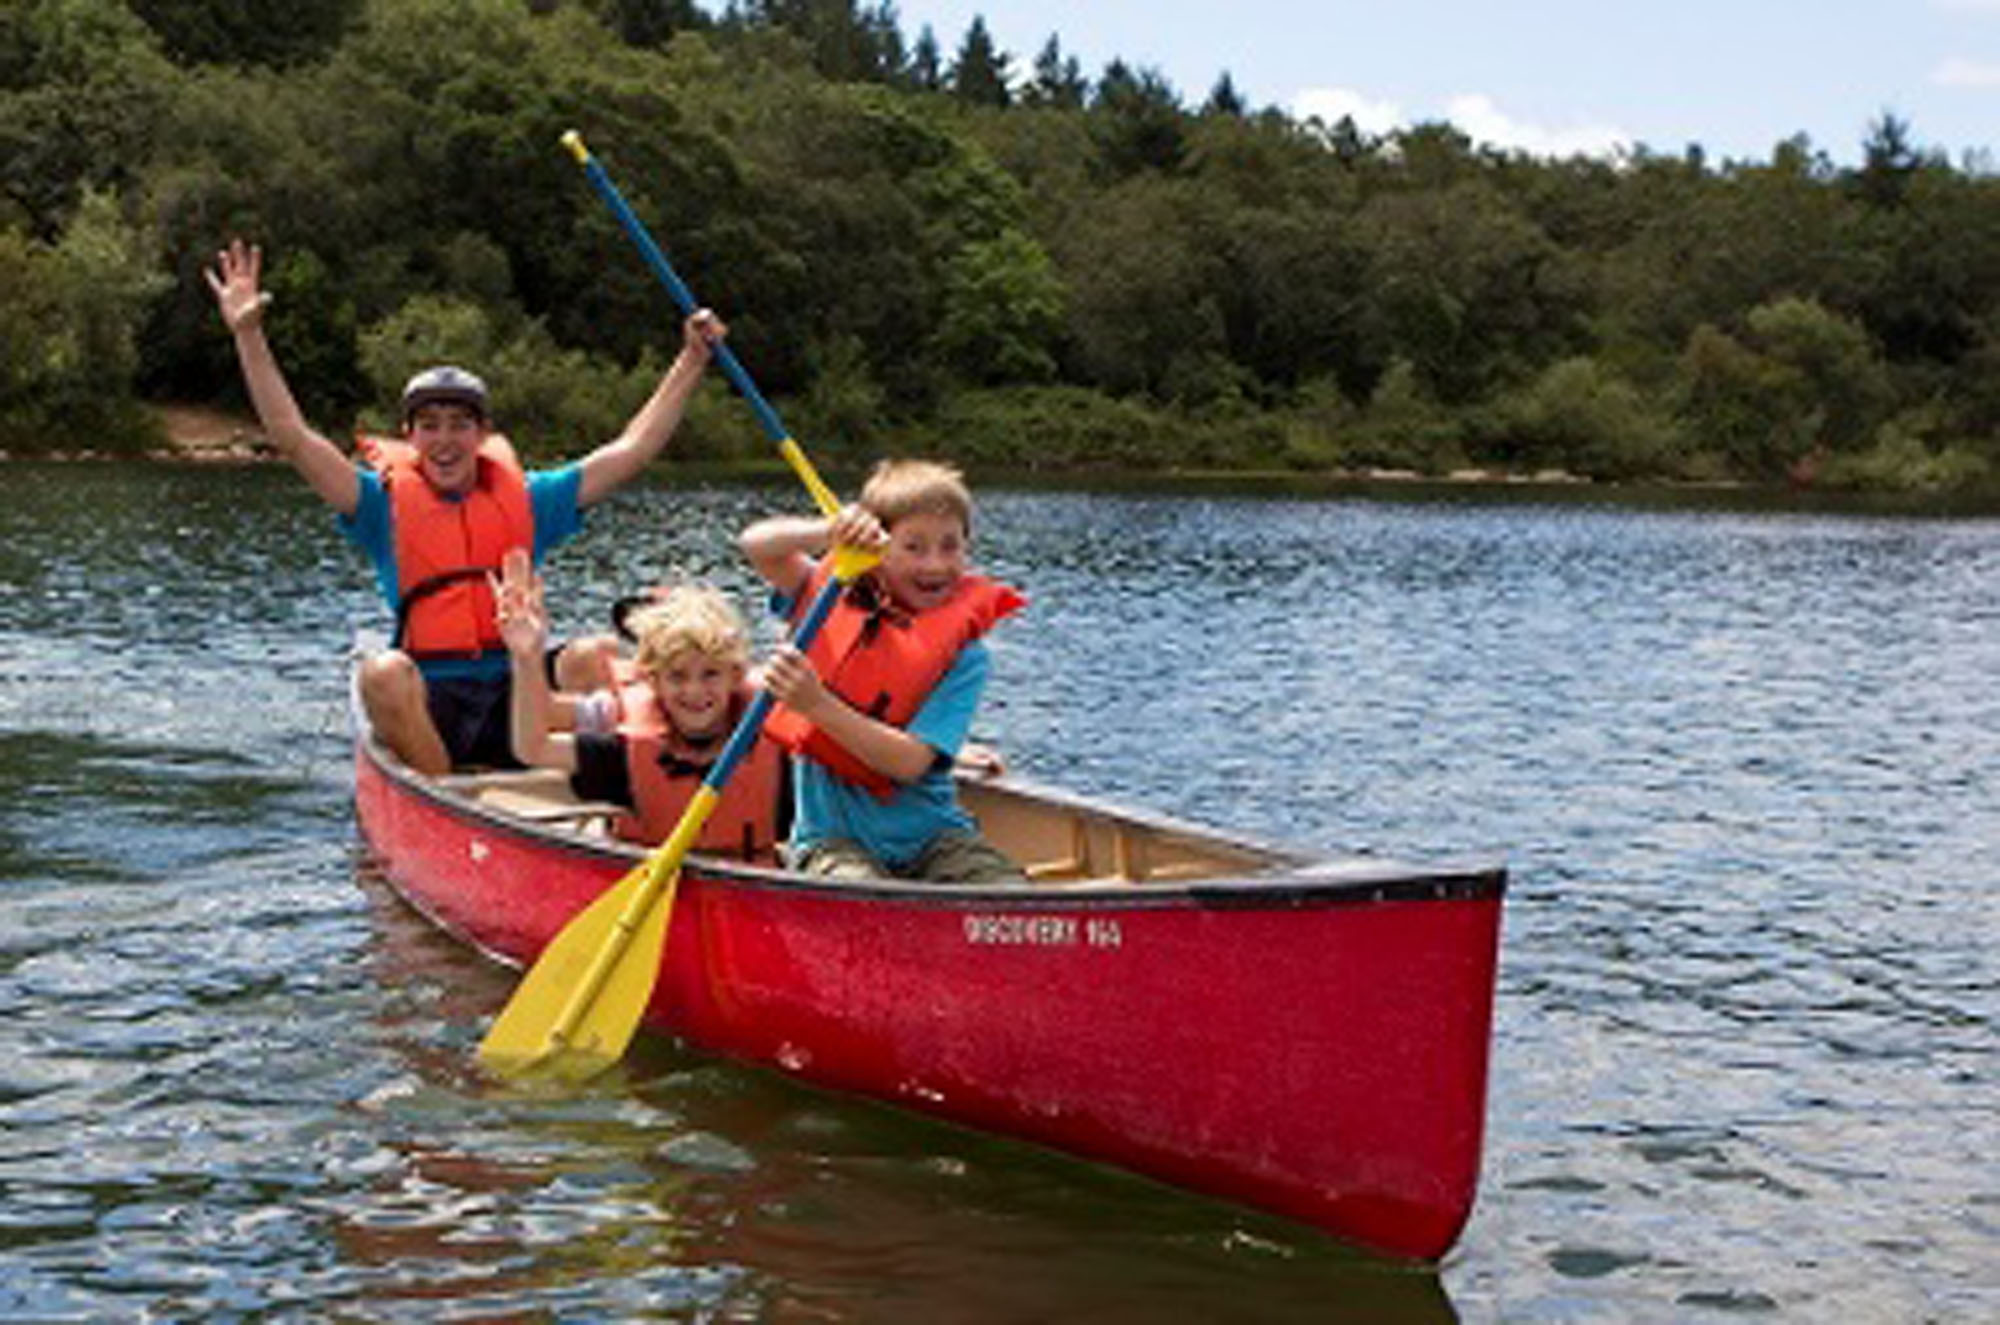 A teenager and a few children paddle a red canoe on a lake with a forest in the background